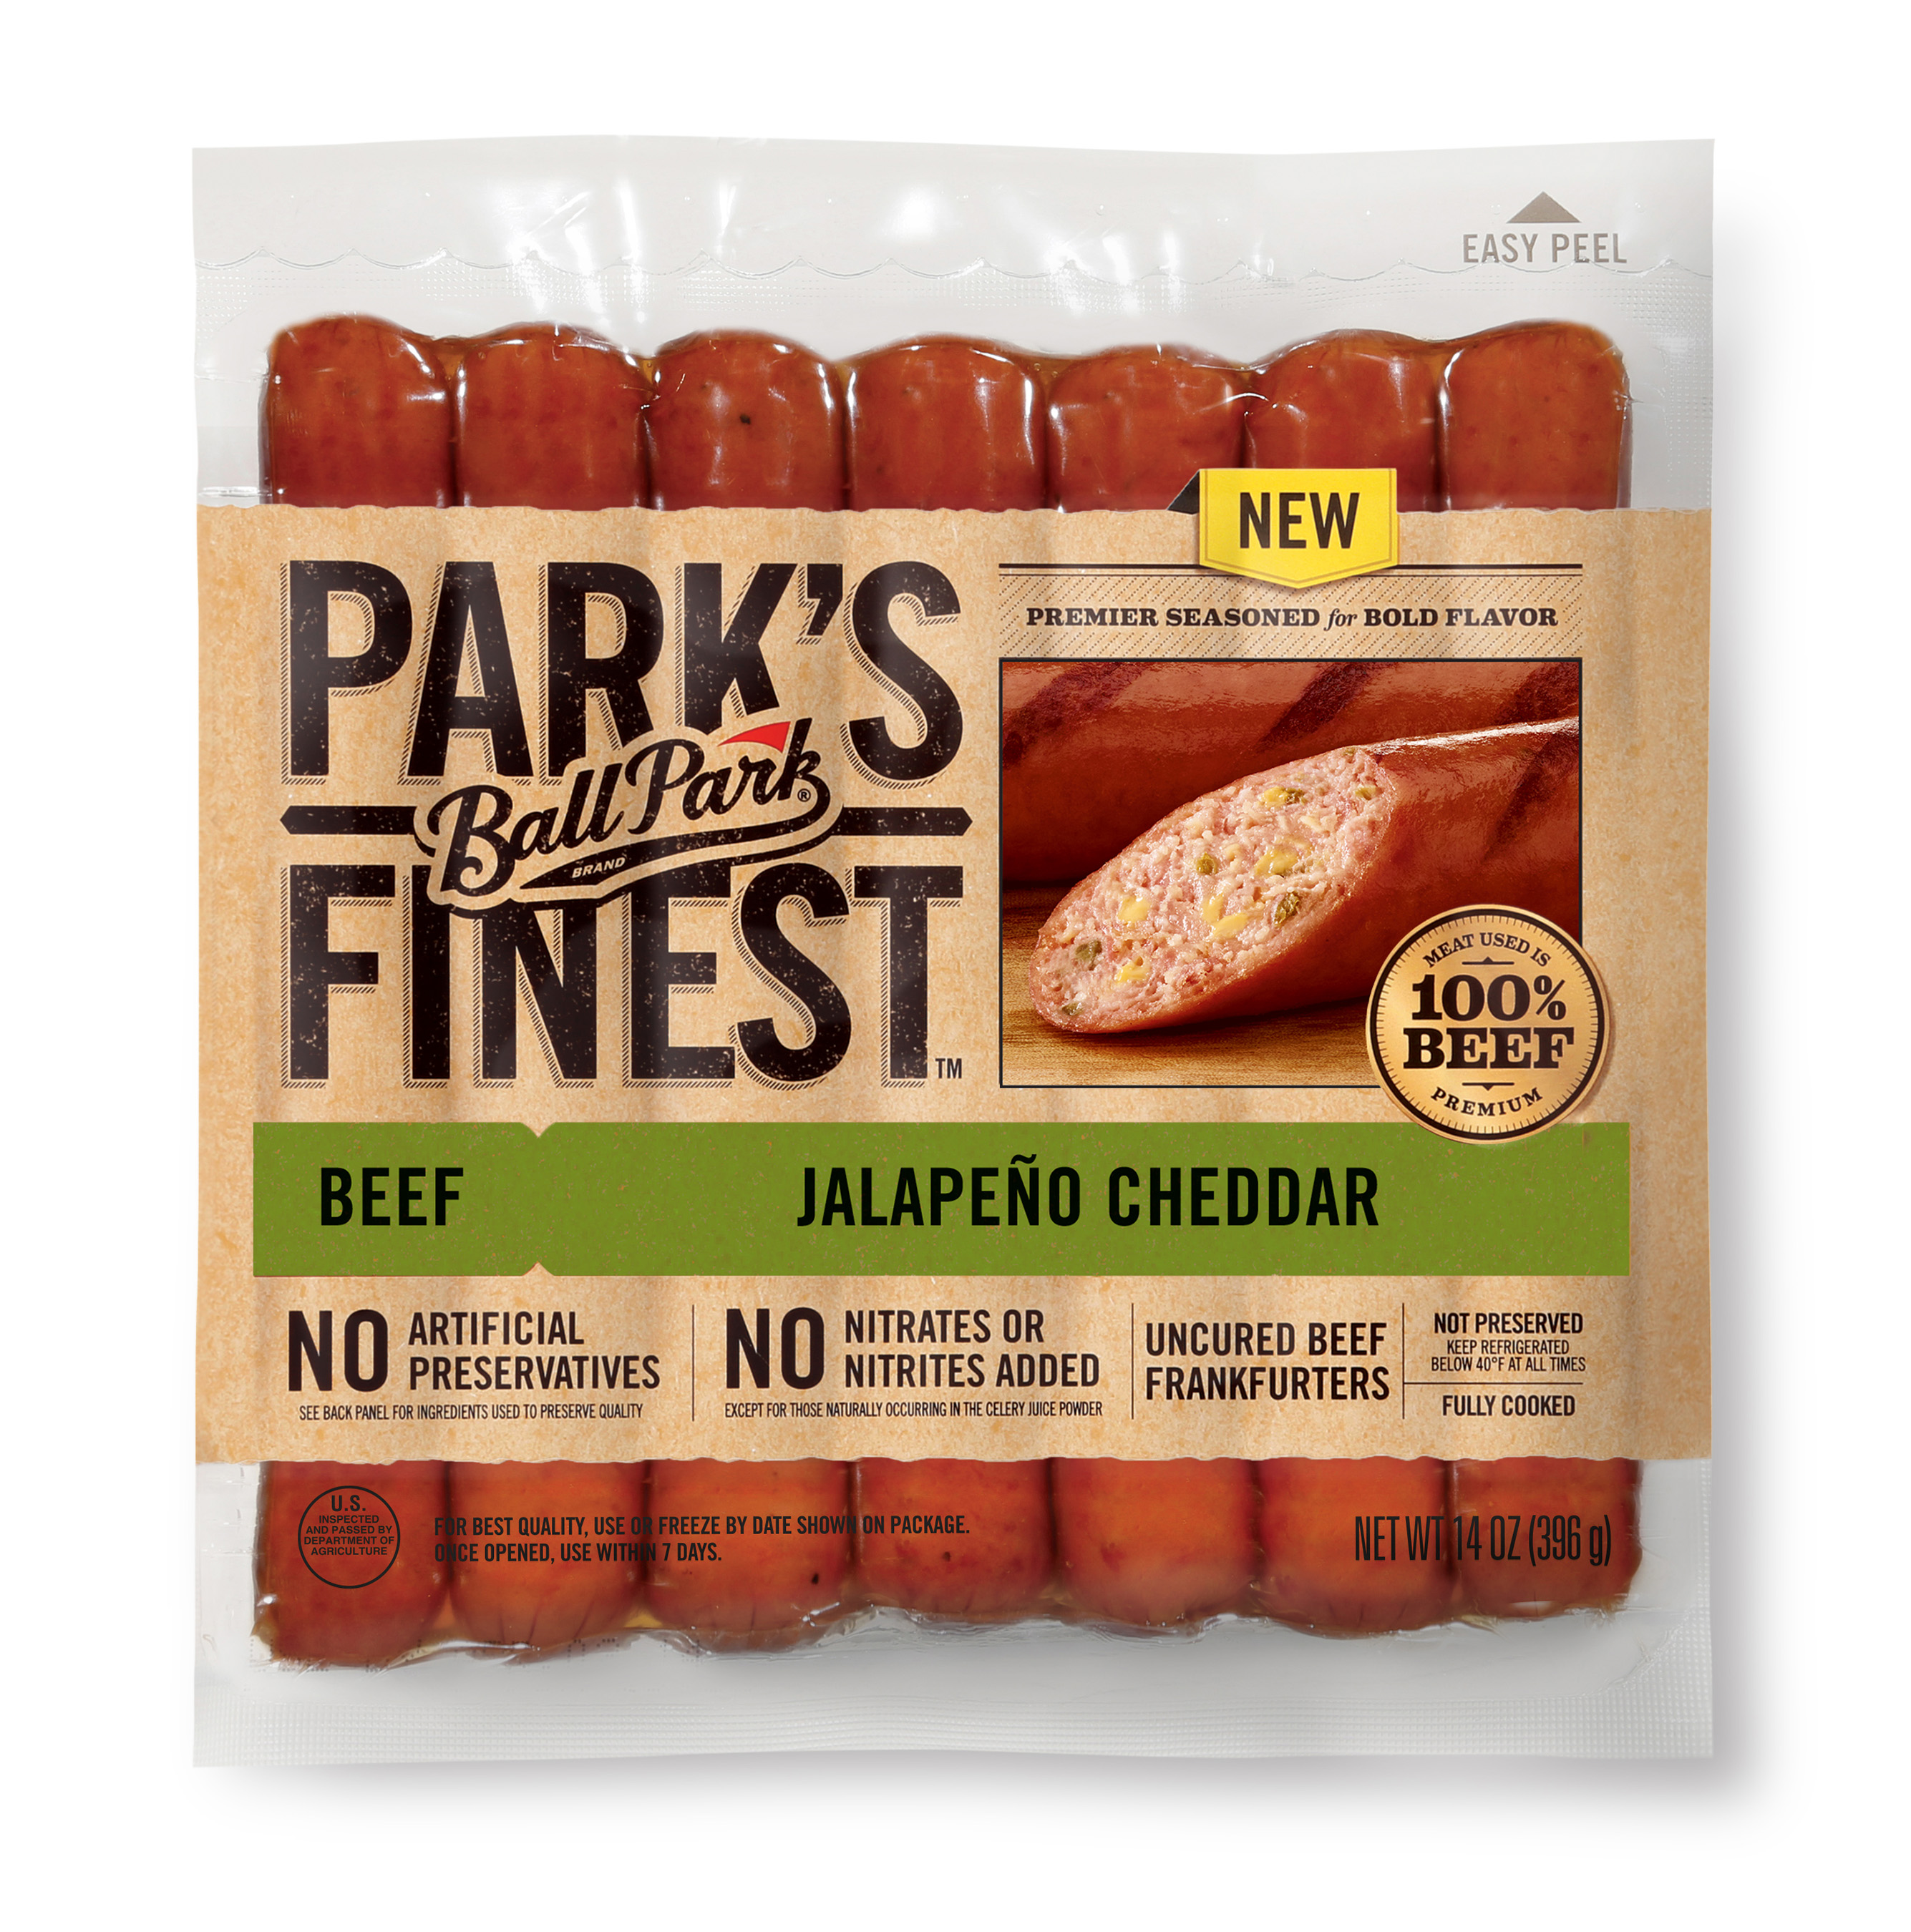 The NEW Ball Park Park's Finest(TM) Jalapeno Cheddar Frankfurters are packed with big, bold flavors and infused with premium seasoning you can see.